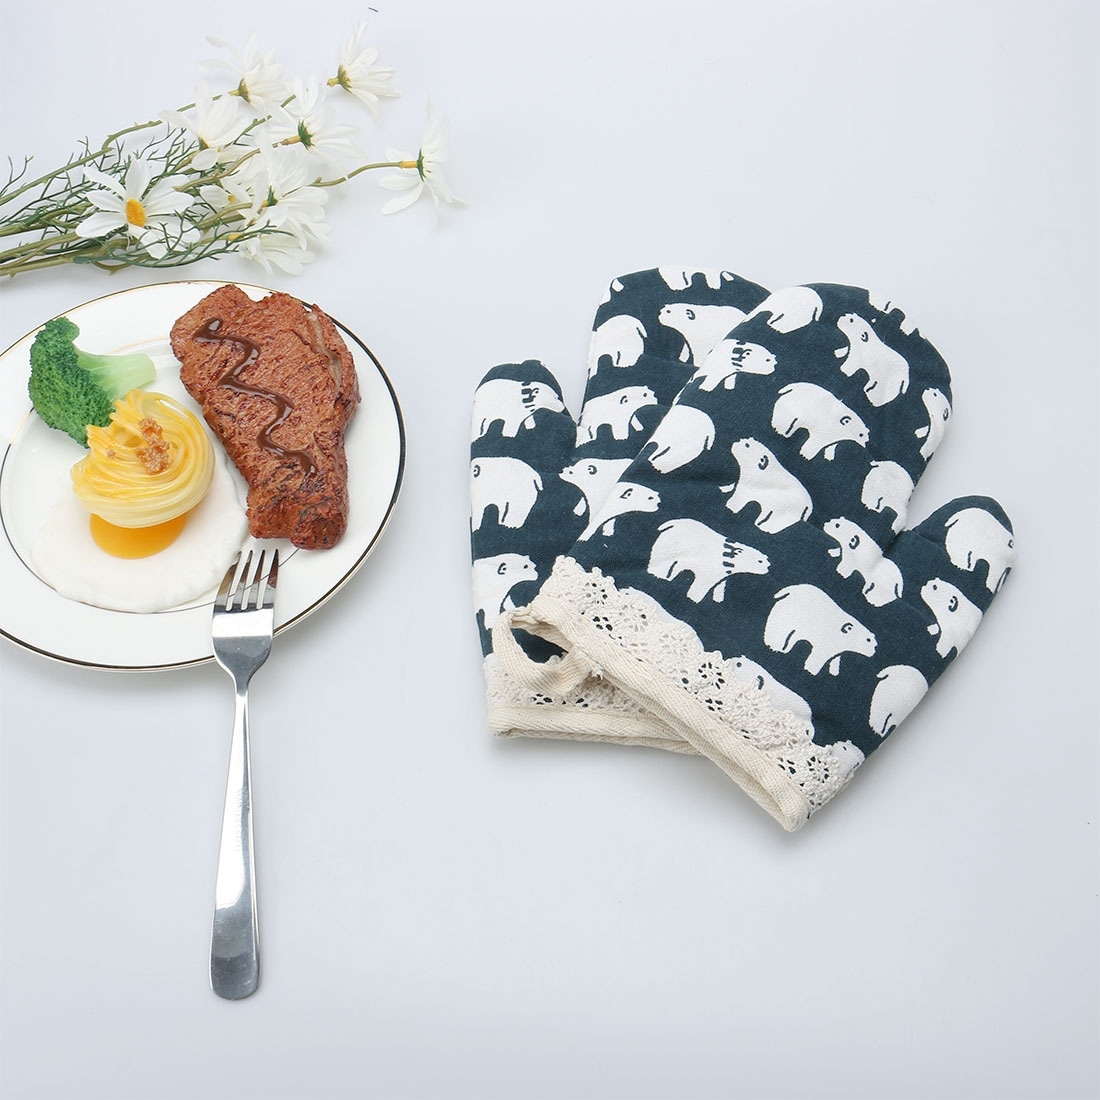 https://ak1.ostkcdn.com/images/products/is/images/direct/8d7dcec9d6d4db00ebc9a17e8f98dc85a0e1d42f/Cotton-Oven-Mitts-Heat-Resistant-Polar-Bear-Pattern-Gloves-Pot-Holder-1-Pair.jpg